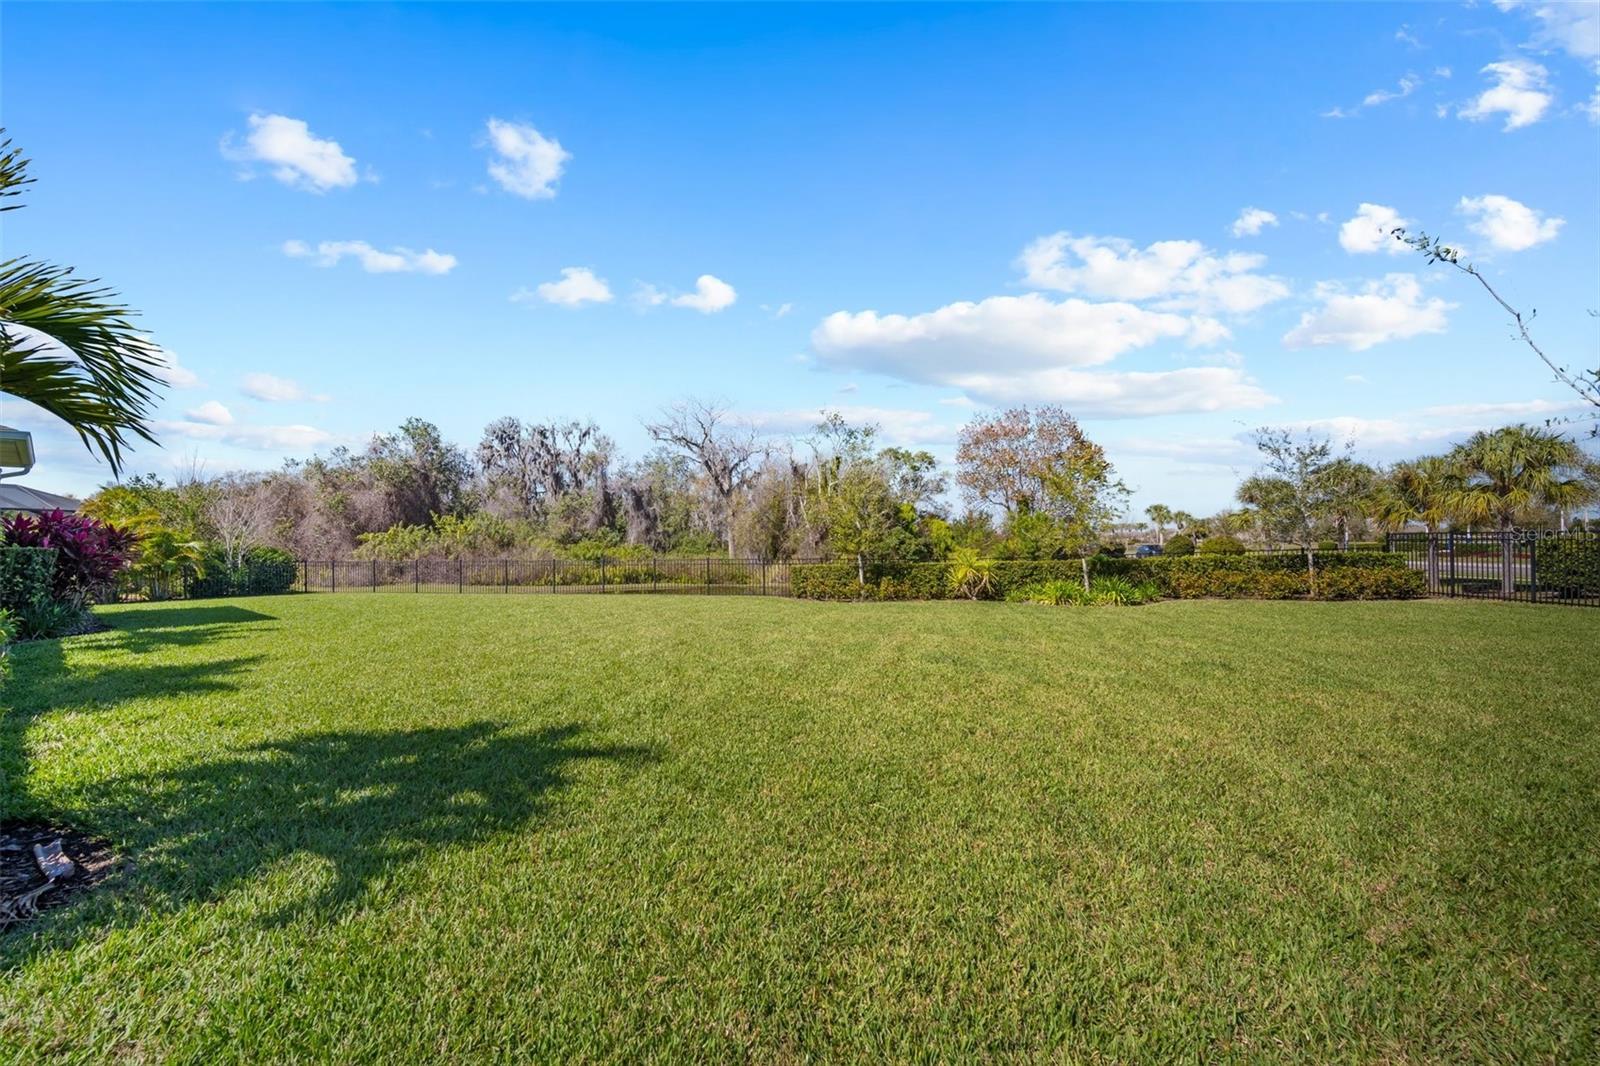 Huge fenced-in backyard. The lot is almost 1/3 acre.